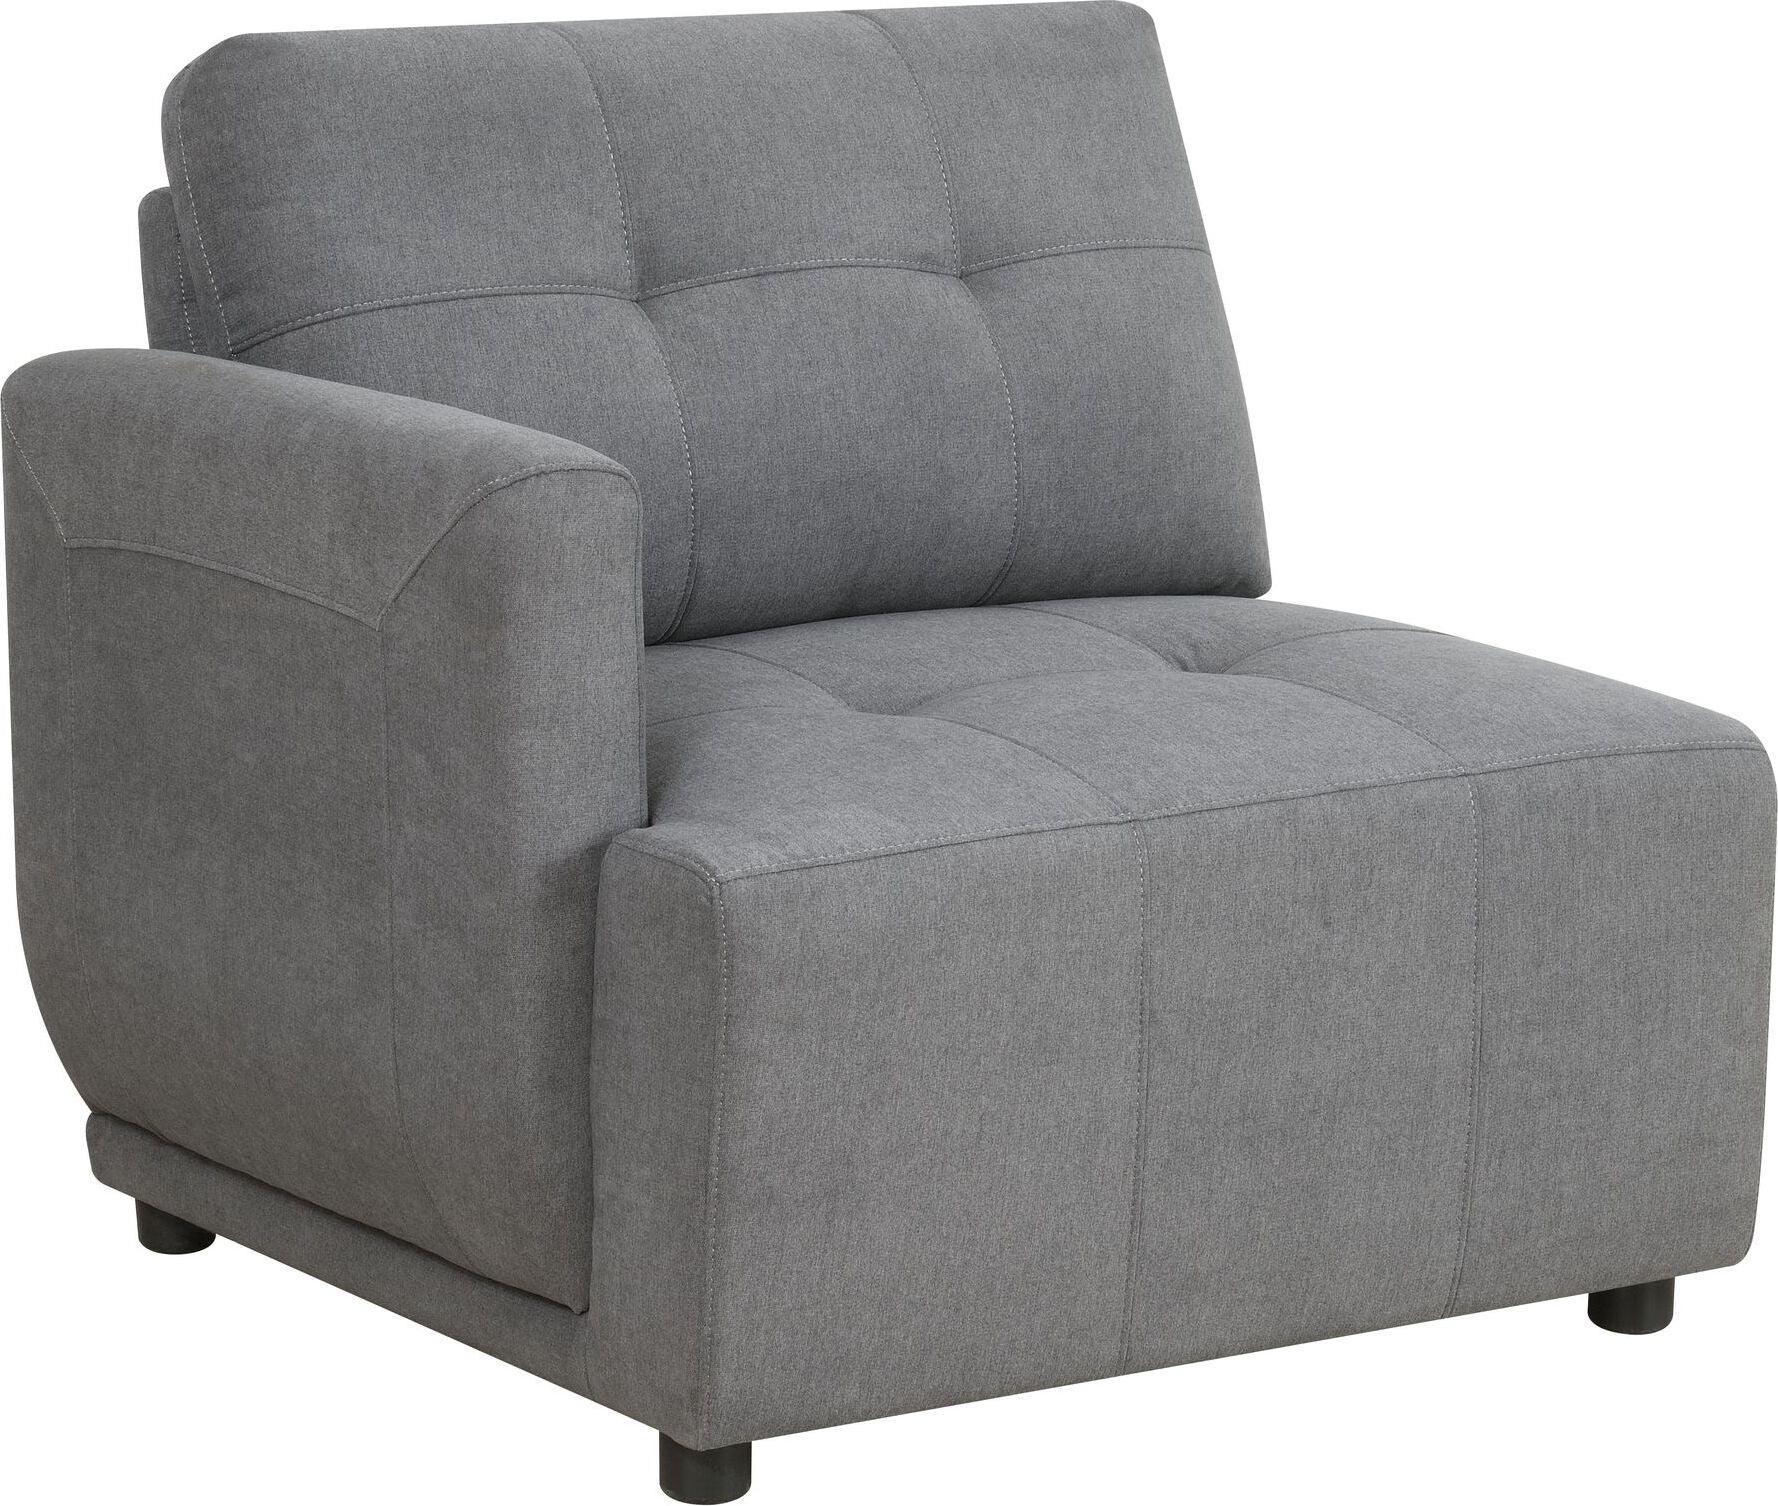 Elements Accent Chairs - Gianni Modular Left Hand Facing Chair With Pillow Charcoal